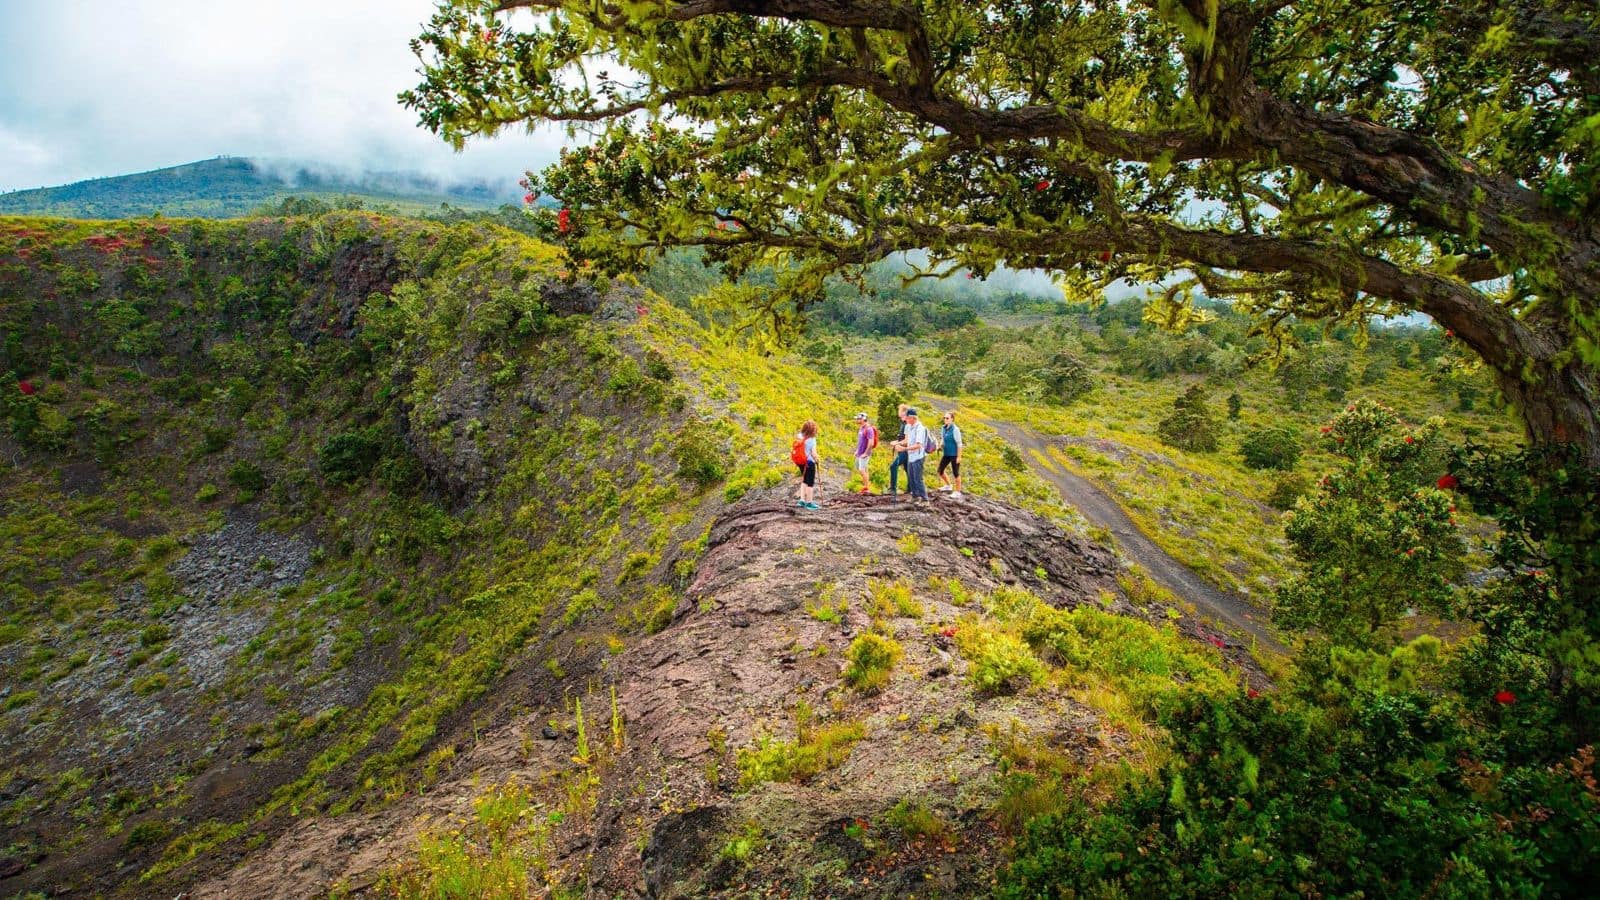 Go for some thrilling volcanic adventures in Hilo, Hawaii